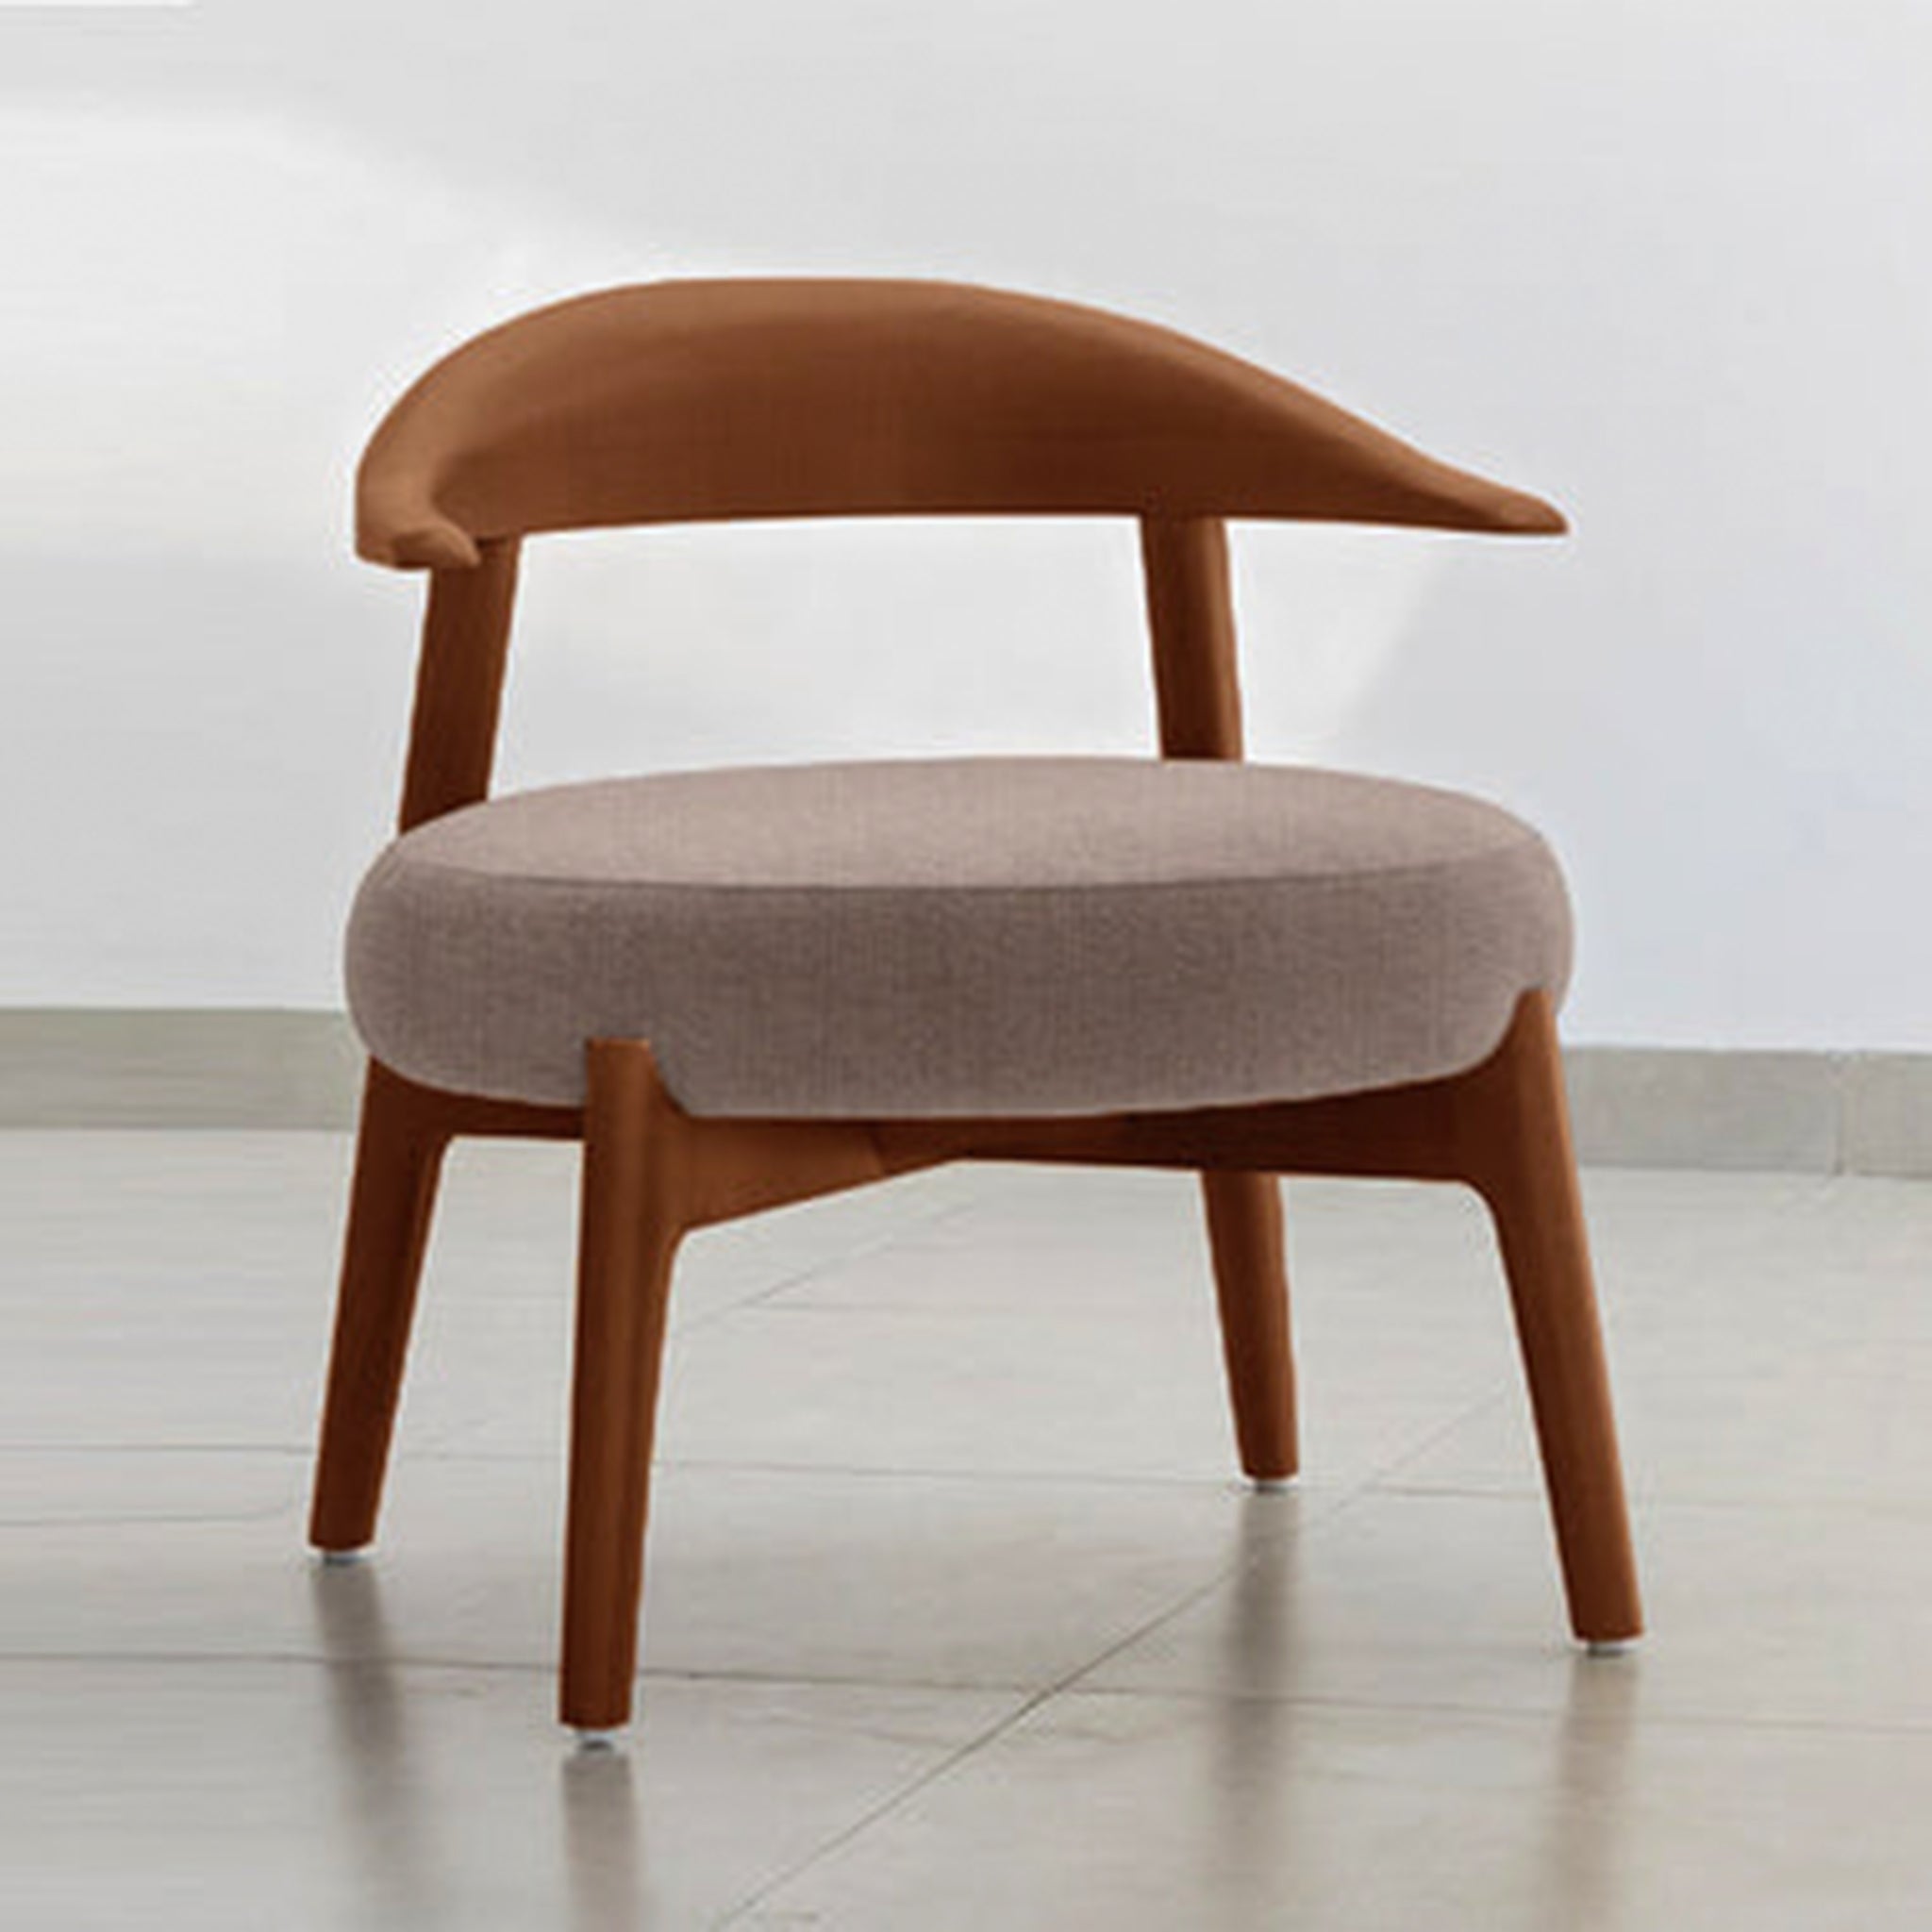 "The Hyde Accent Chair with a stylish wooden backrest and cushioned seat"